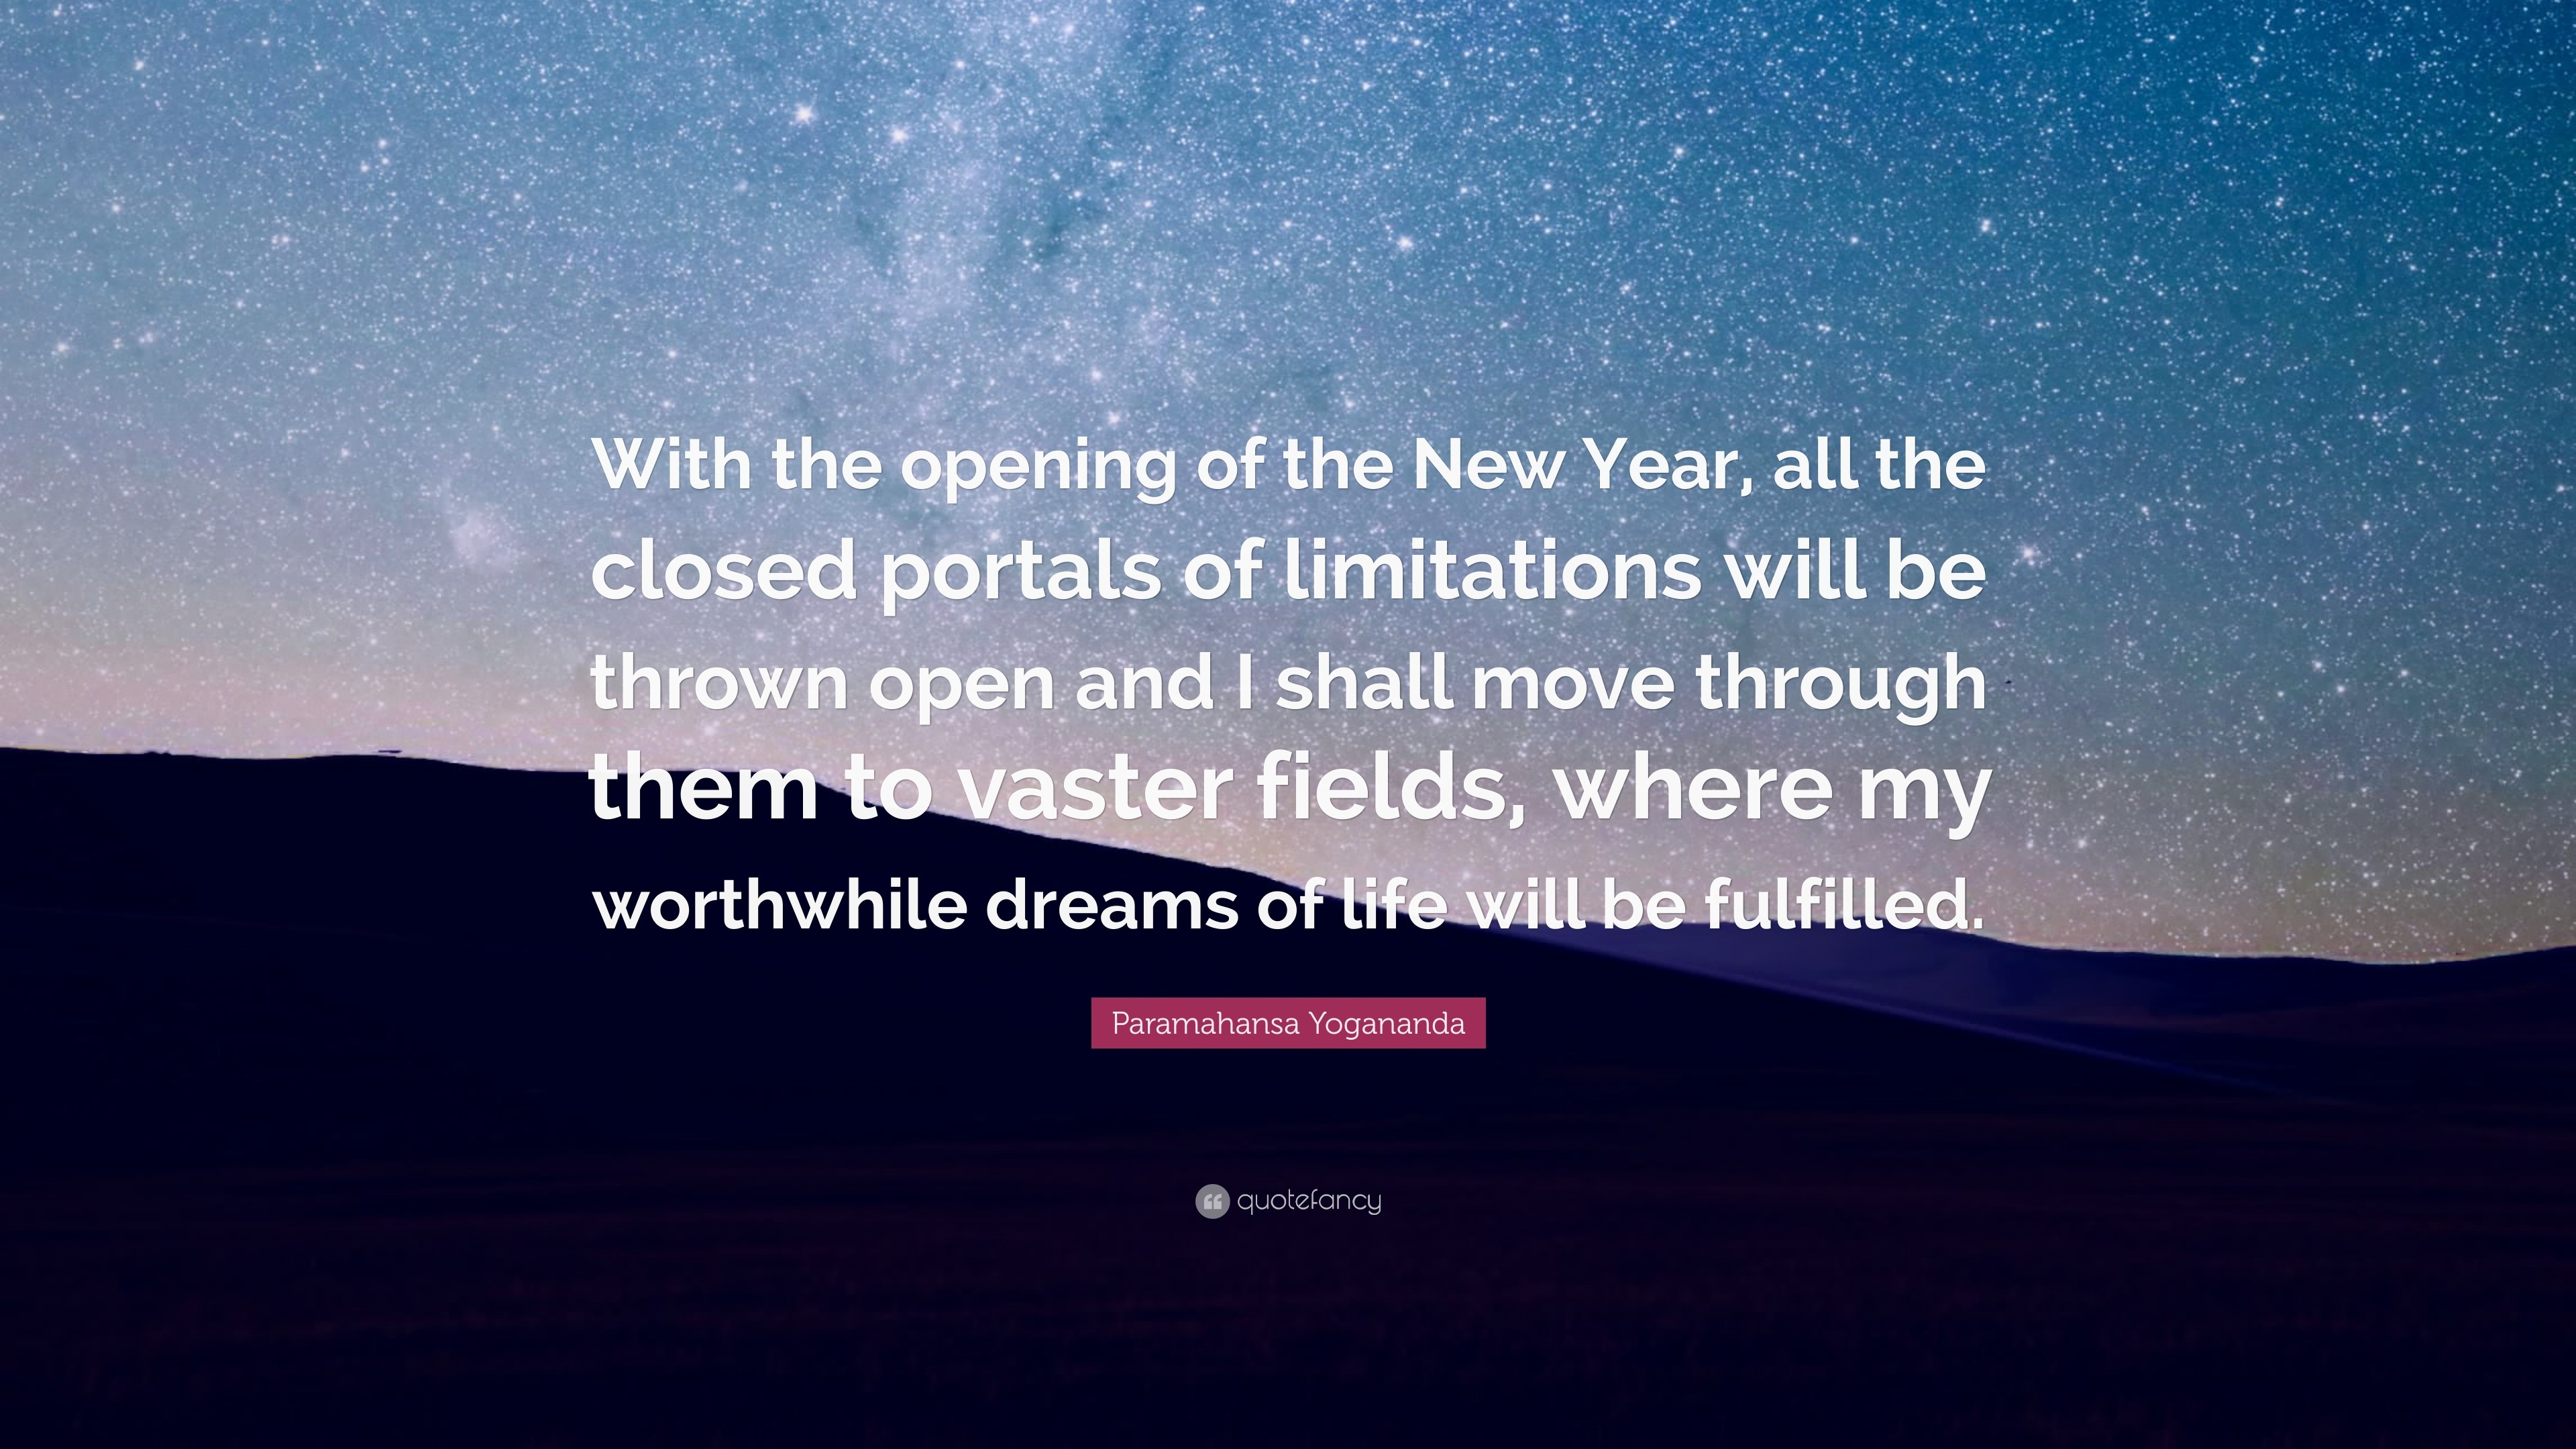 New Year Quotes “With the opening of the New Year all the closed